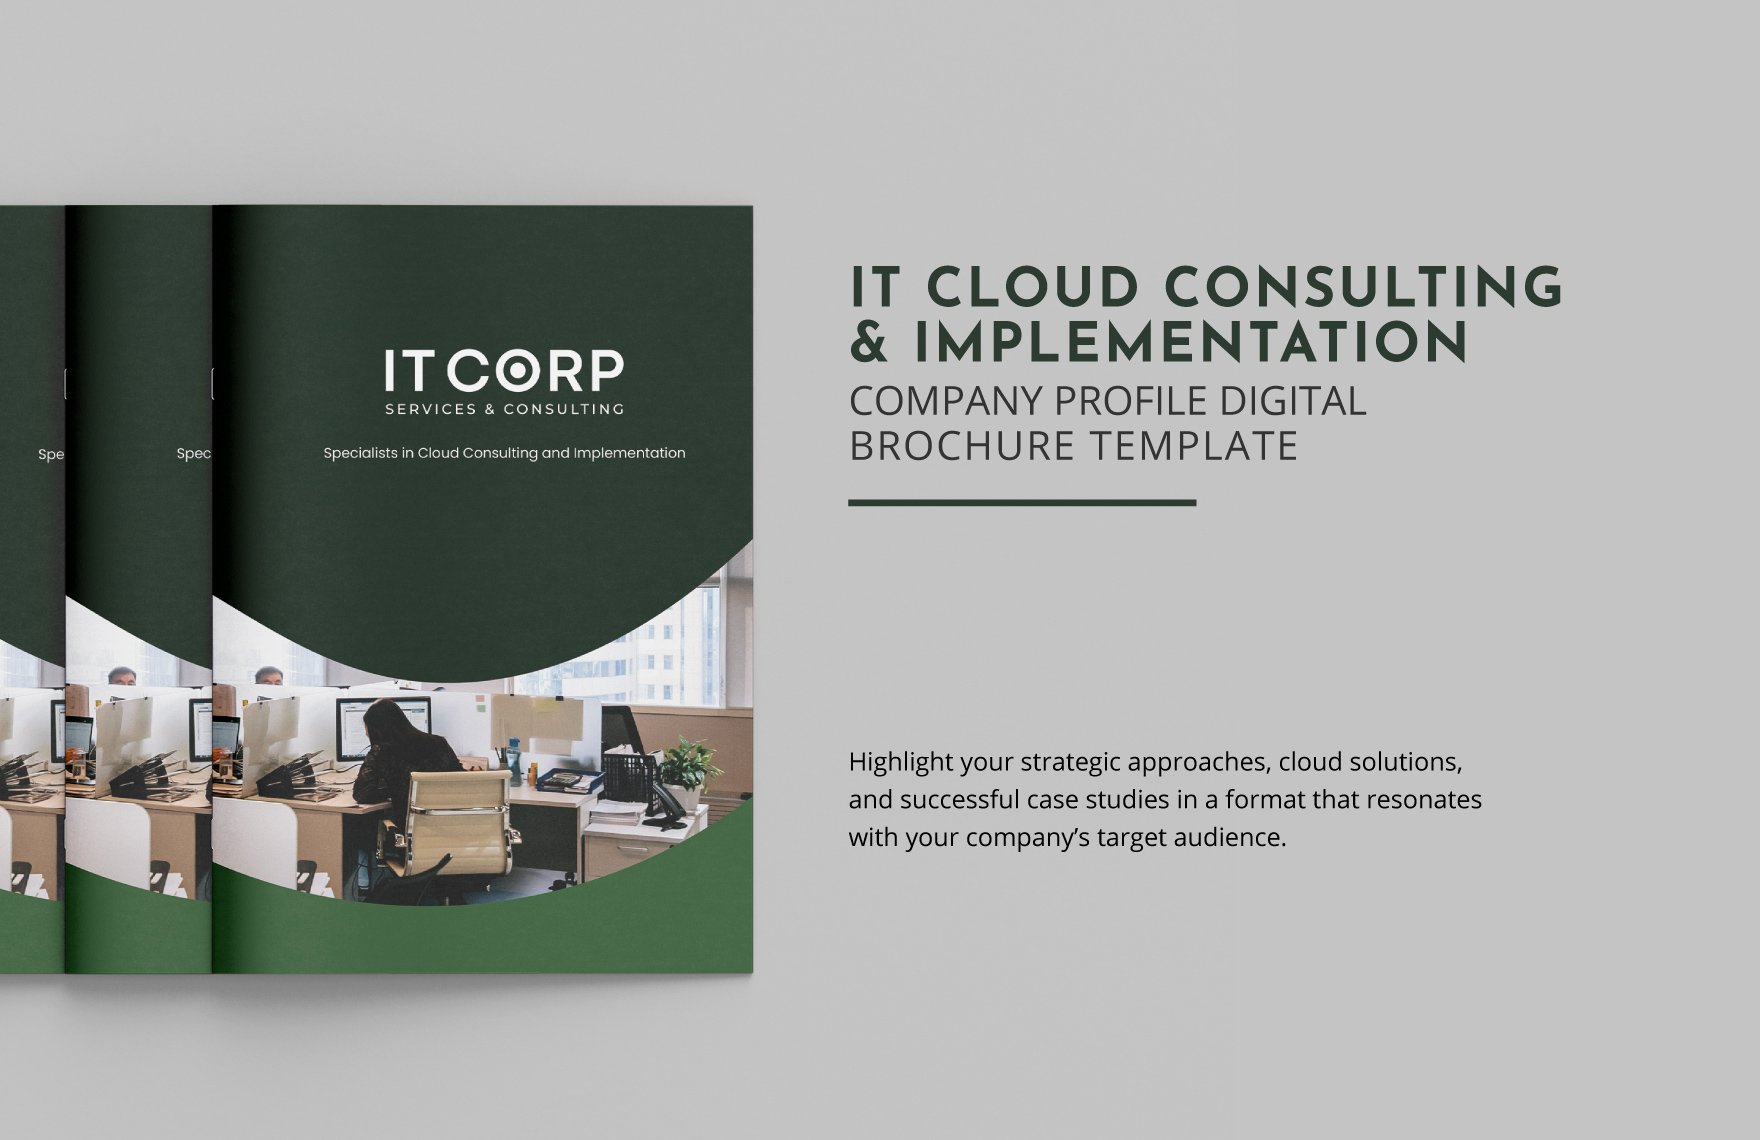 IT Cloud Consulting & Implementation Company Profile Digital Brochure Template